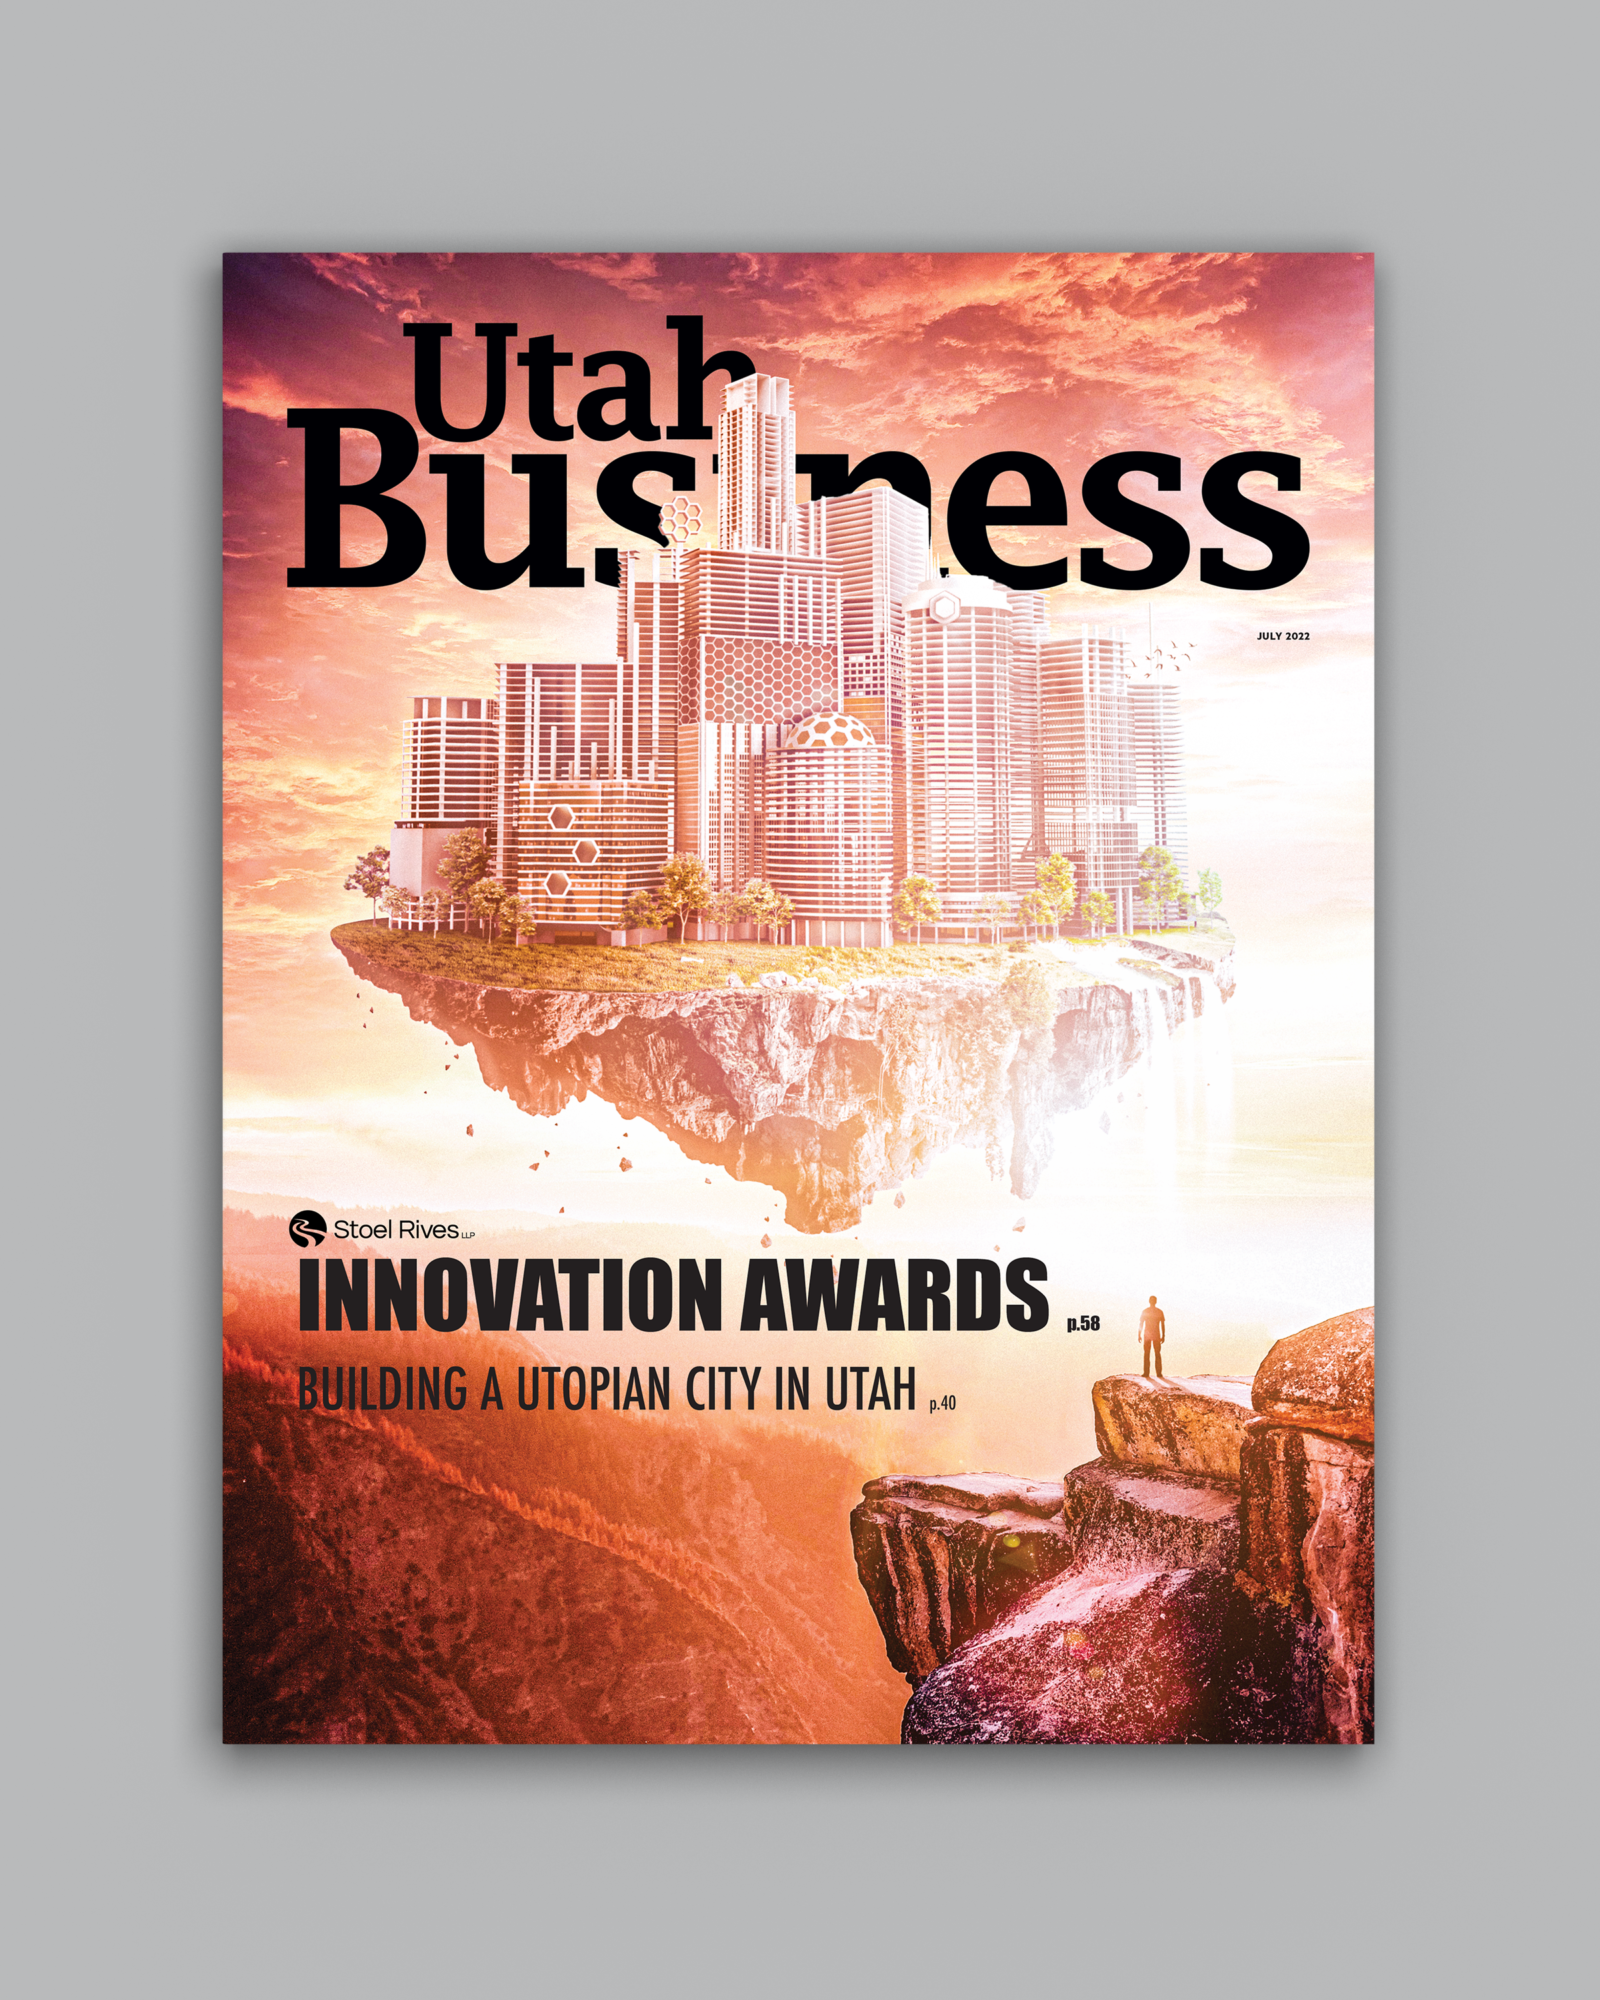 The Utah Business - July 2022 features the 2022 Innovation Awards as well as a look into how rural Utah towns are doing economically, and more.